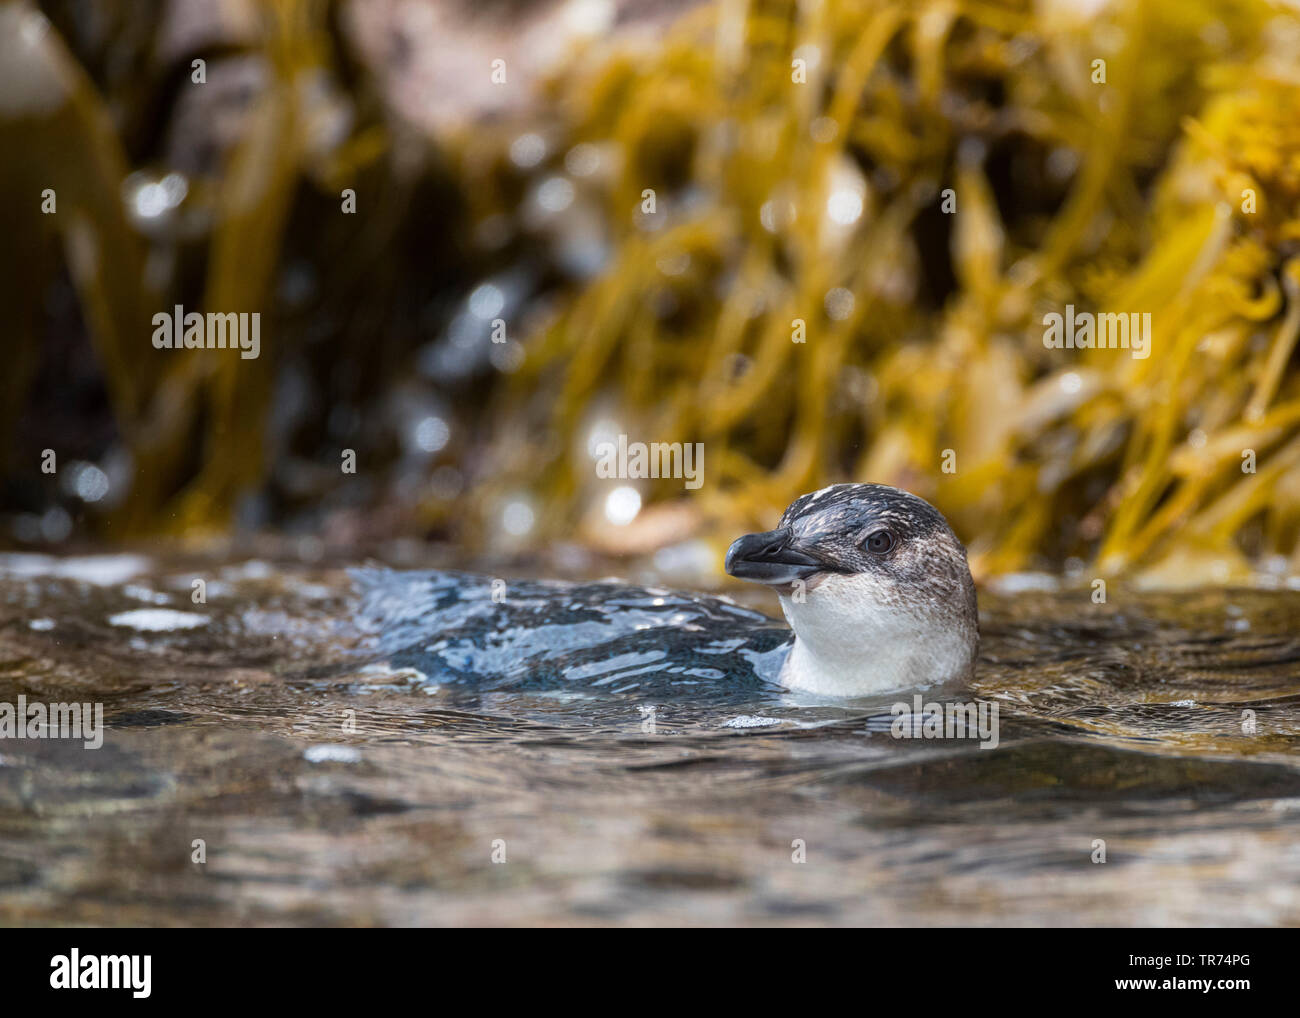 Chattham little penguin (Eudyptula minor chathamensis), swimming at the ...